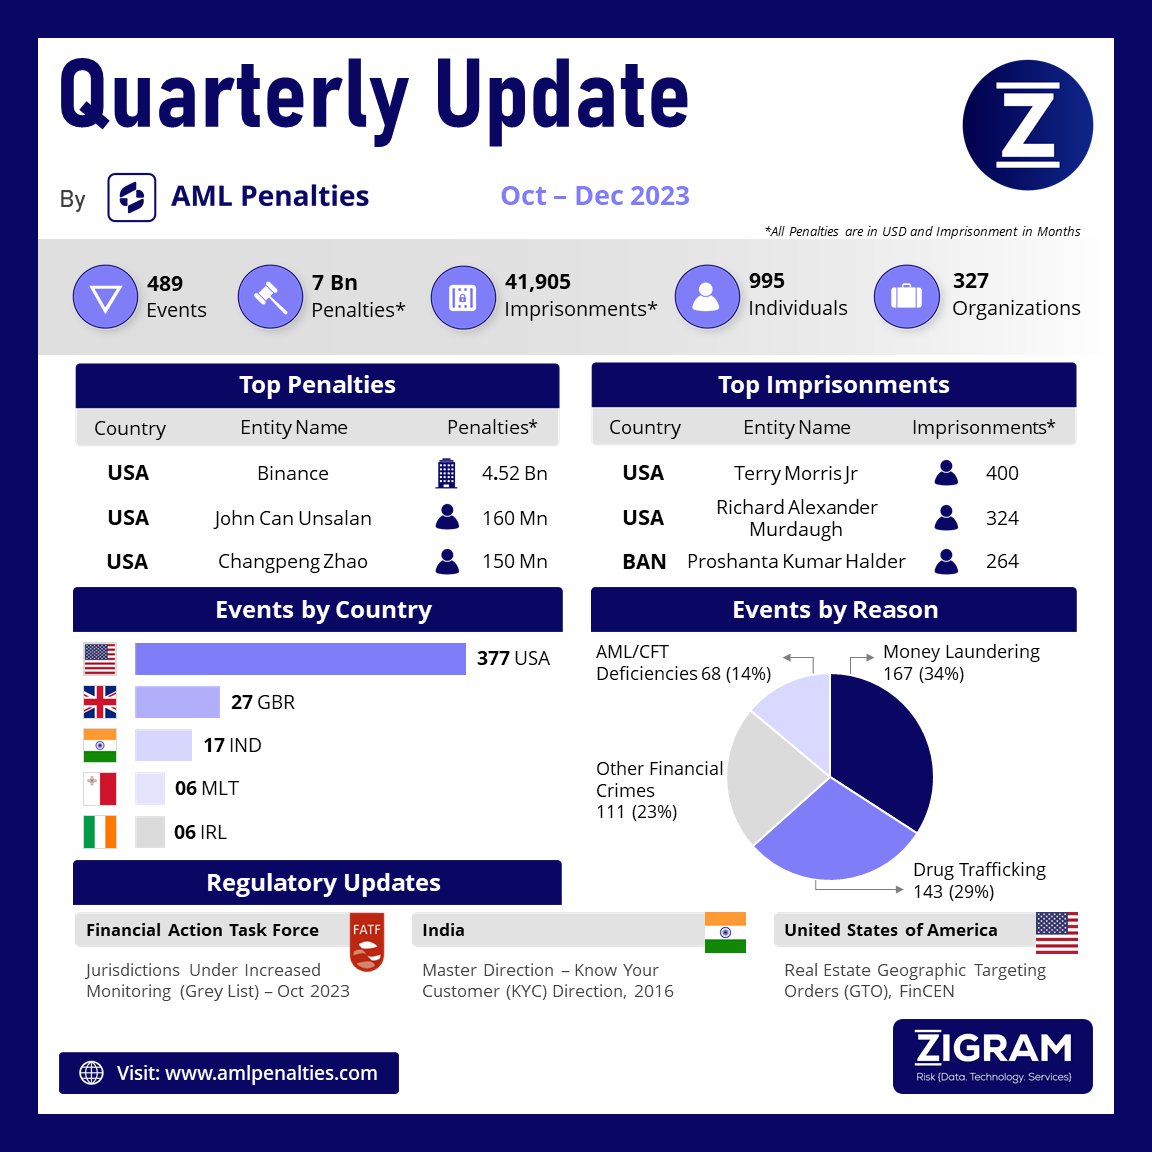 The AML Penalties – Quarterly Update for Q4 2023 is out!

Signup for free on zurl.co/d6v9 to get more updates and insights.
Visit our website: zurl.co/M3oJ

#quarterlyupdate #amlcft #duediligence #fatf #digitalasset #europeanunion #crypto #vasp